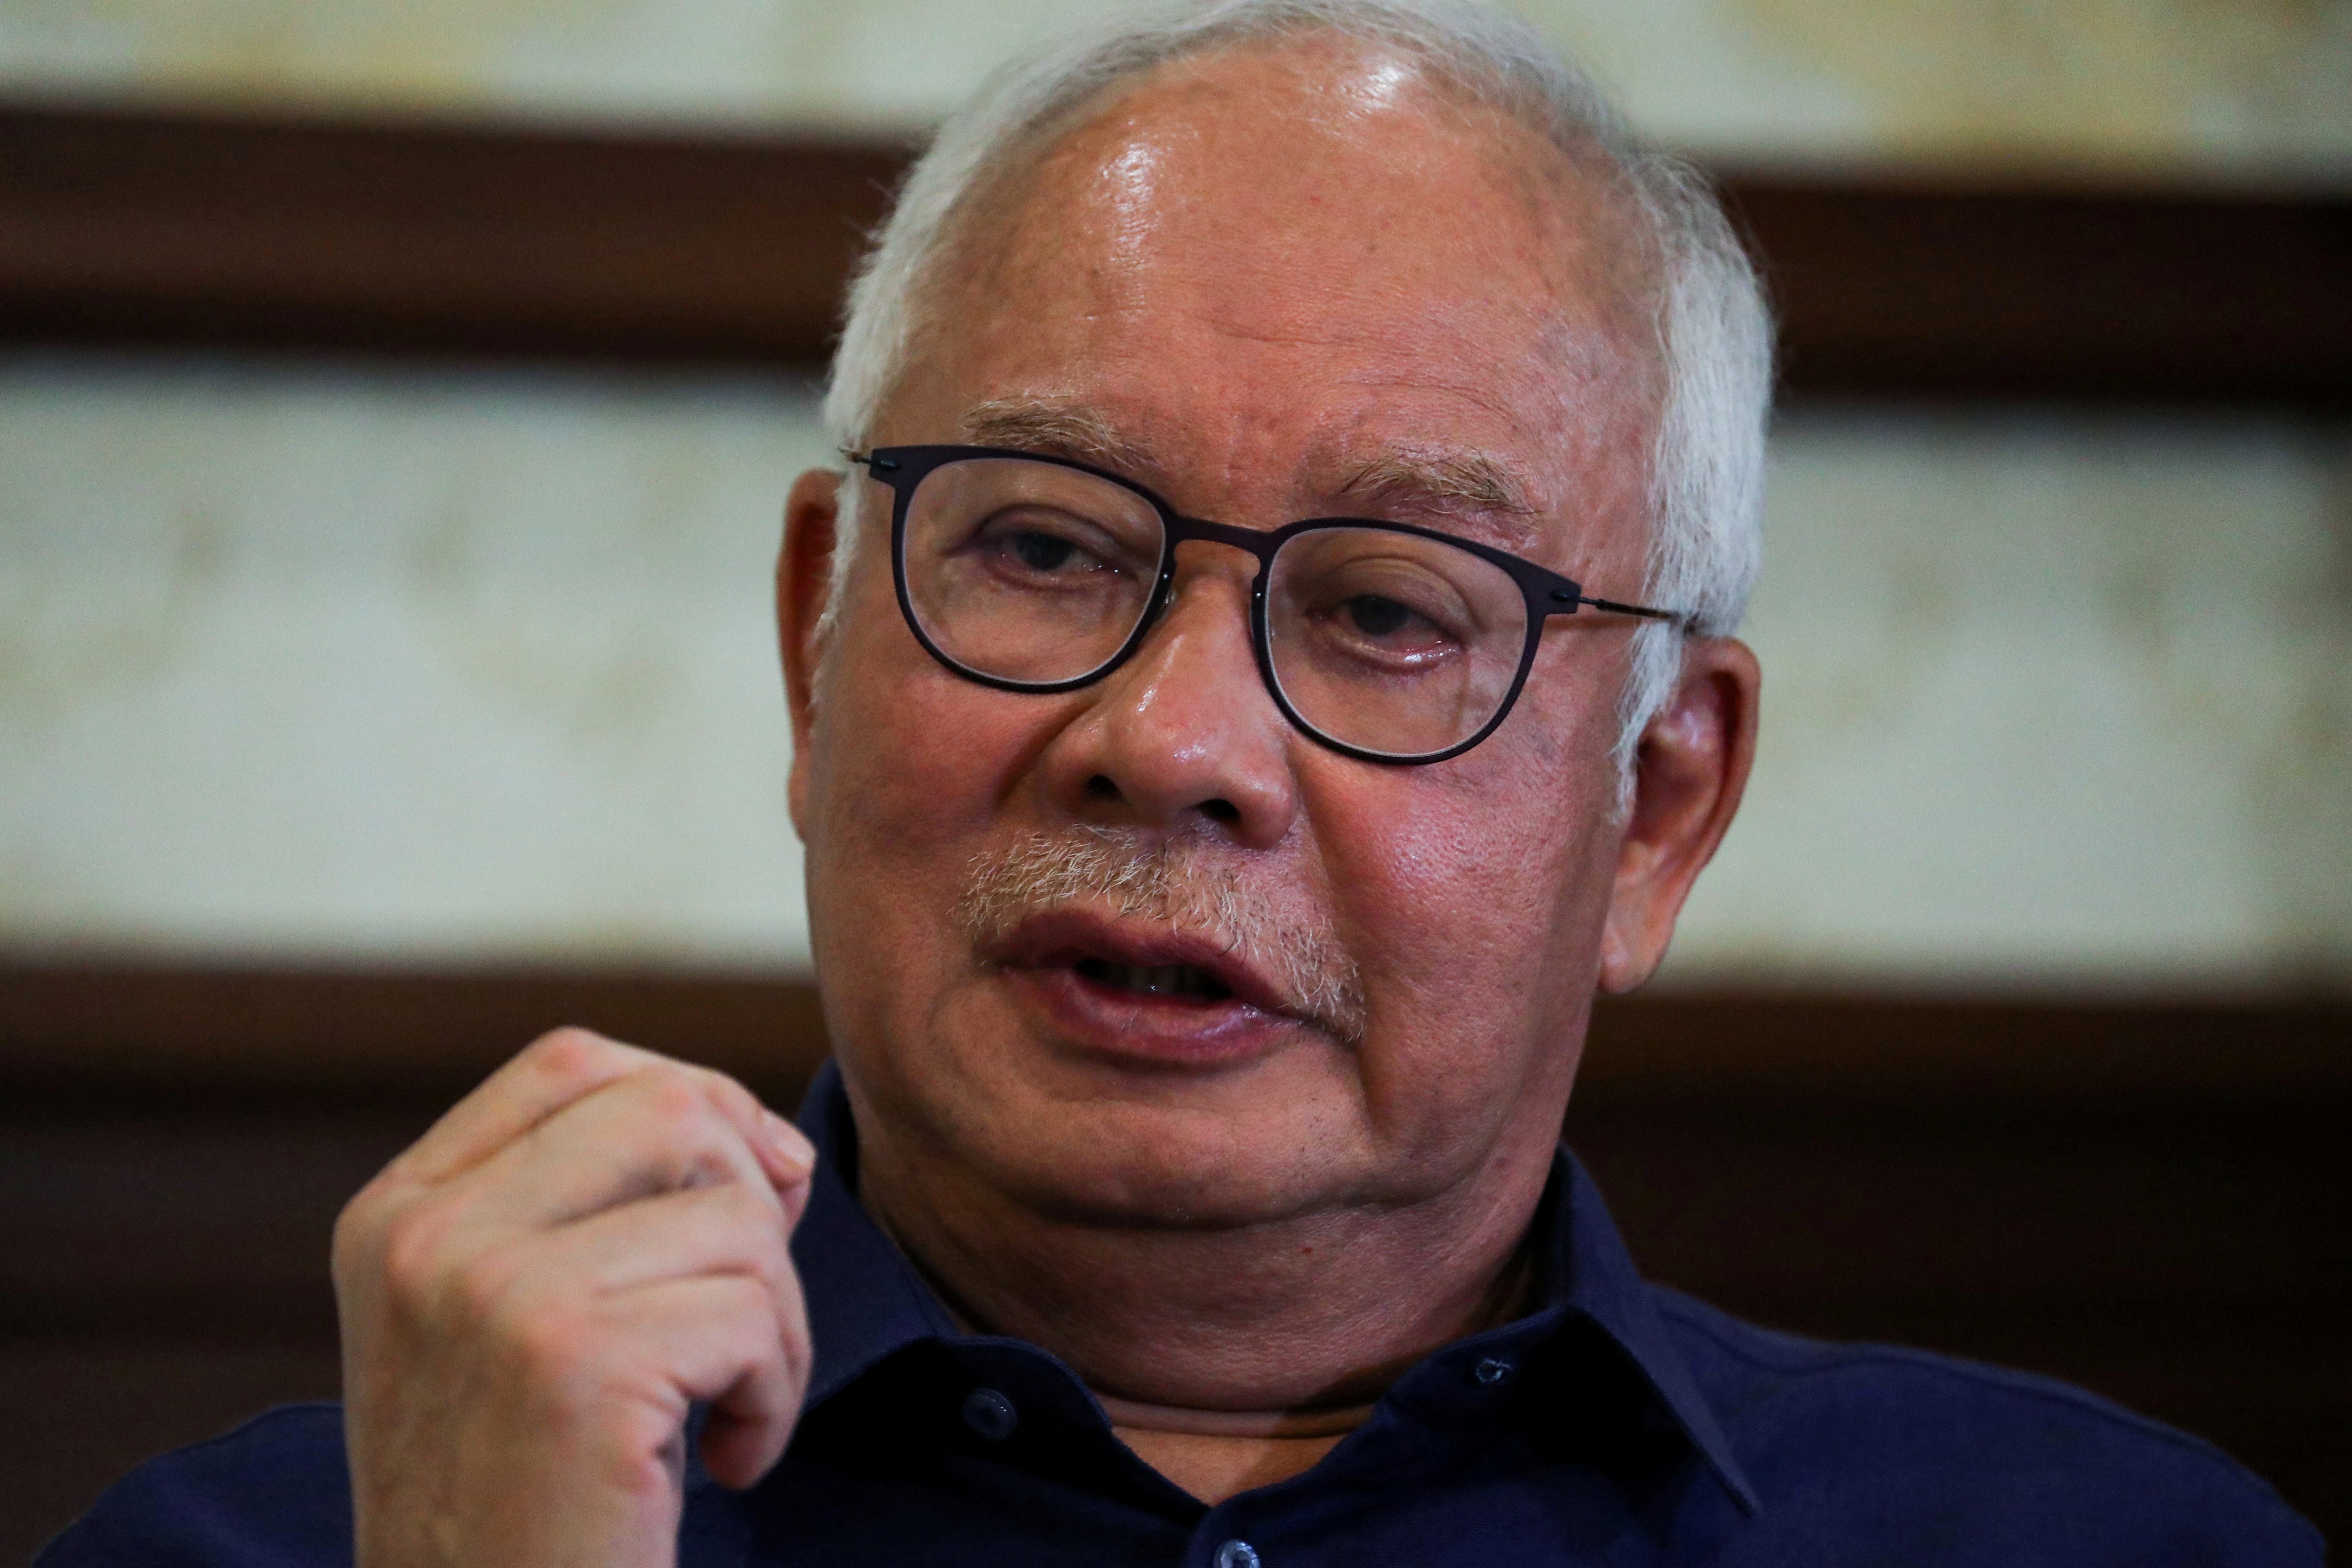 Malaysia's former Prime Minister Najib Razak speaks during an interview with Reuters in Kuala Lumpur